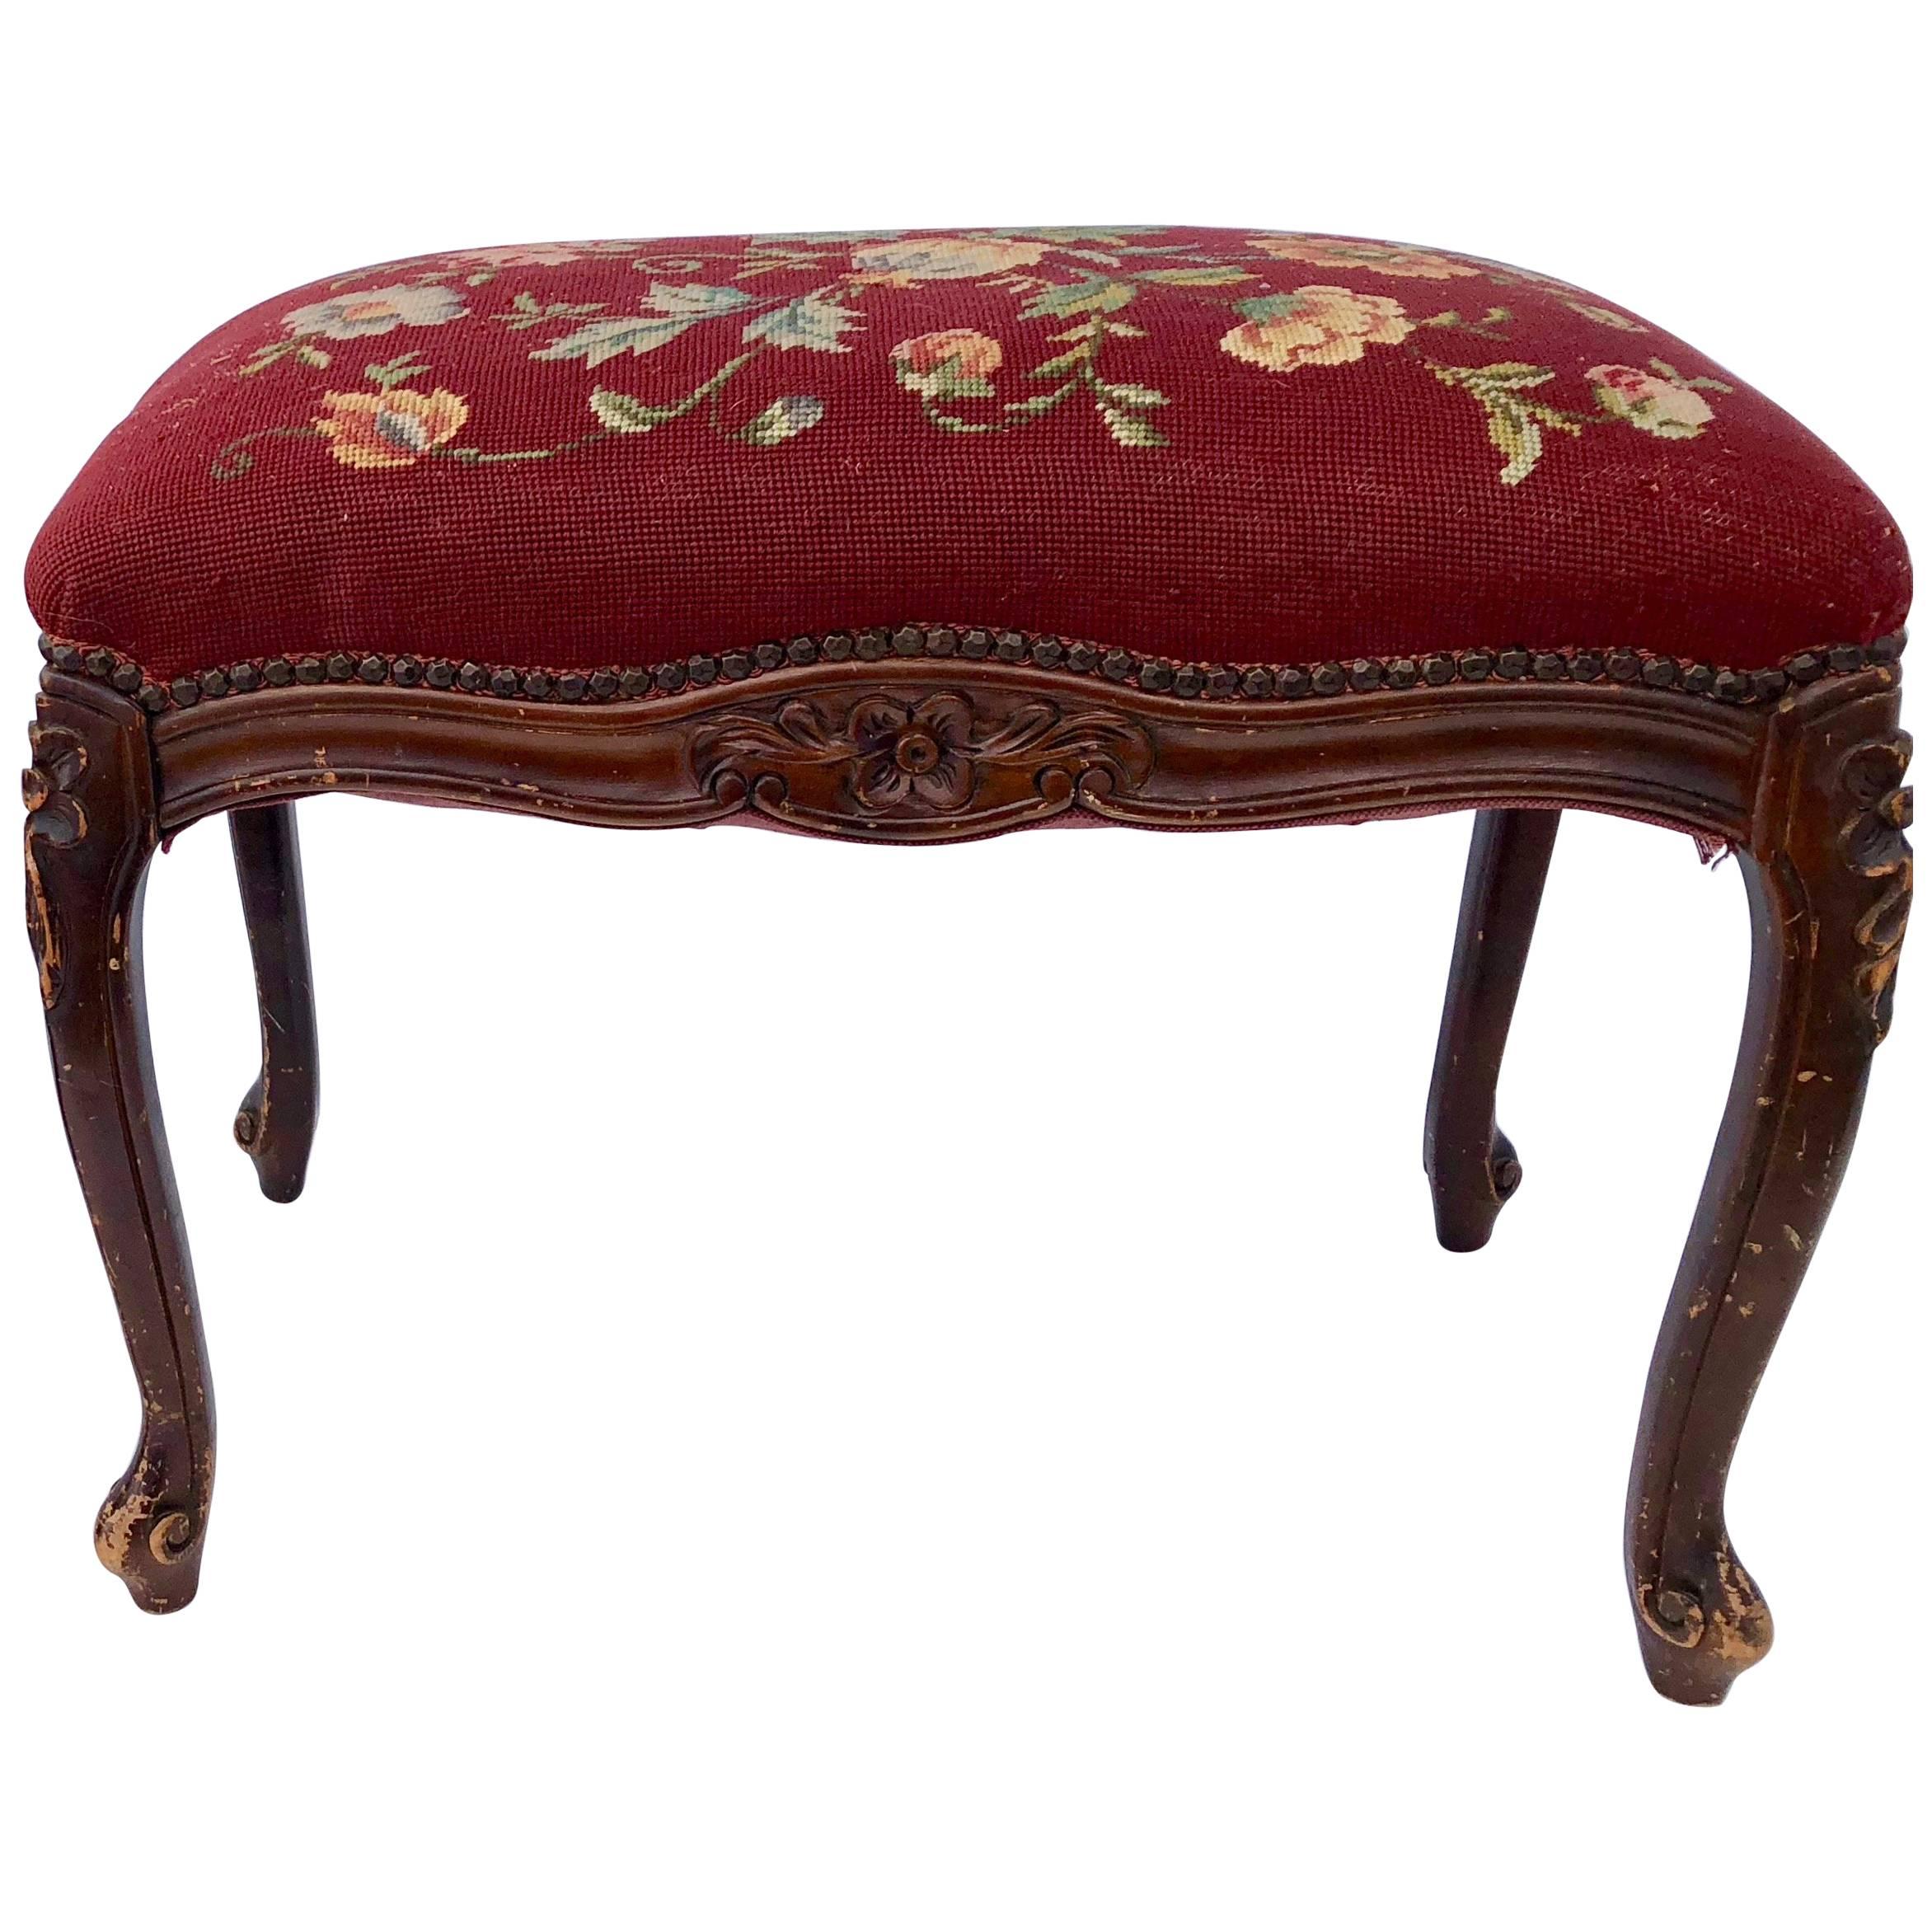 French Rectangular Bench Covered with Tapestry Fabric, Early 1900s For Sale